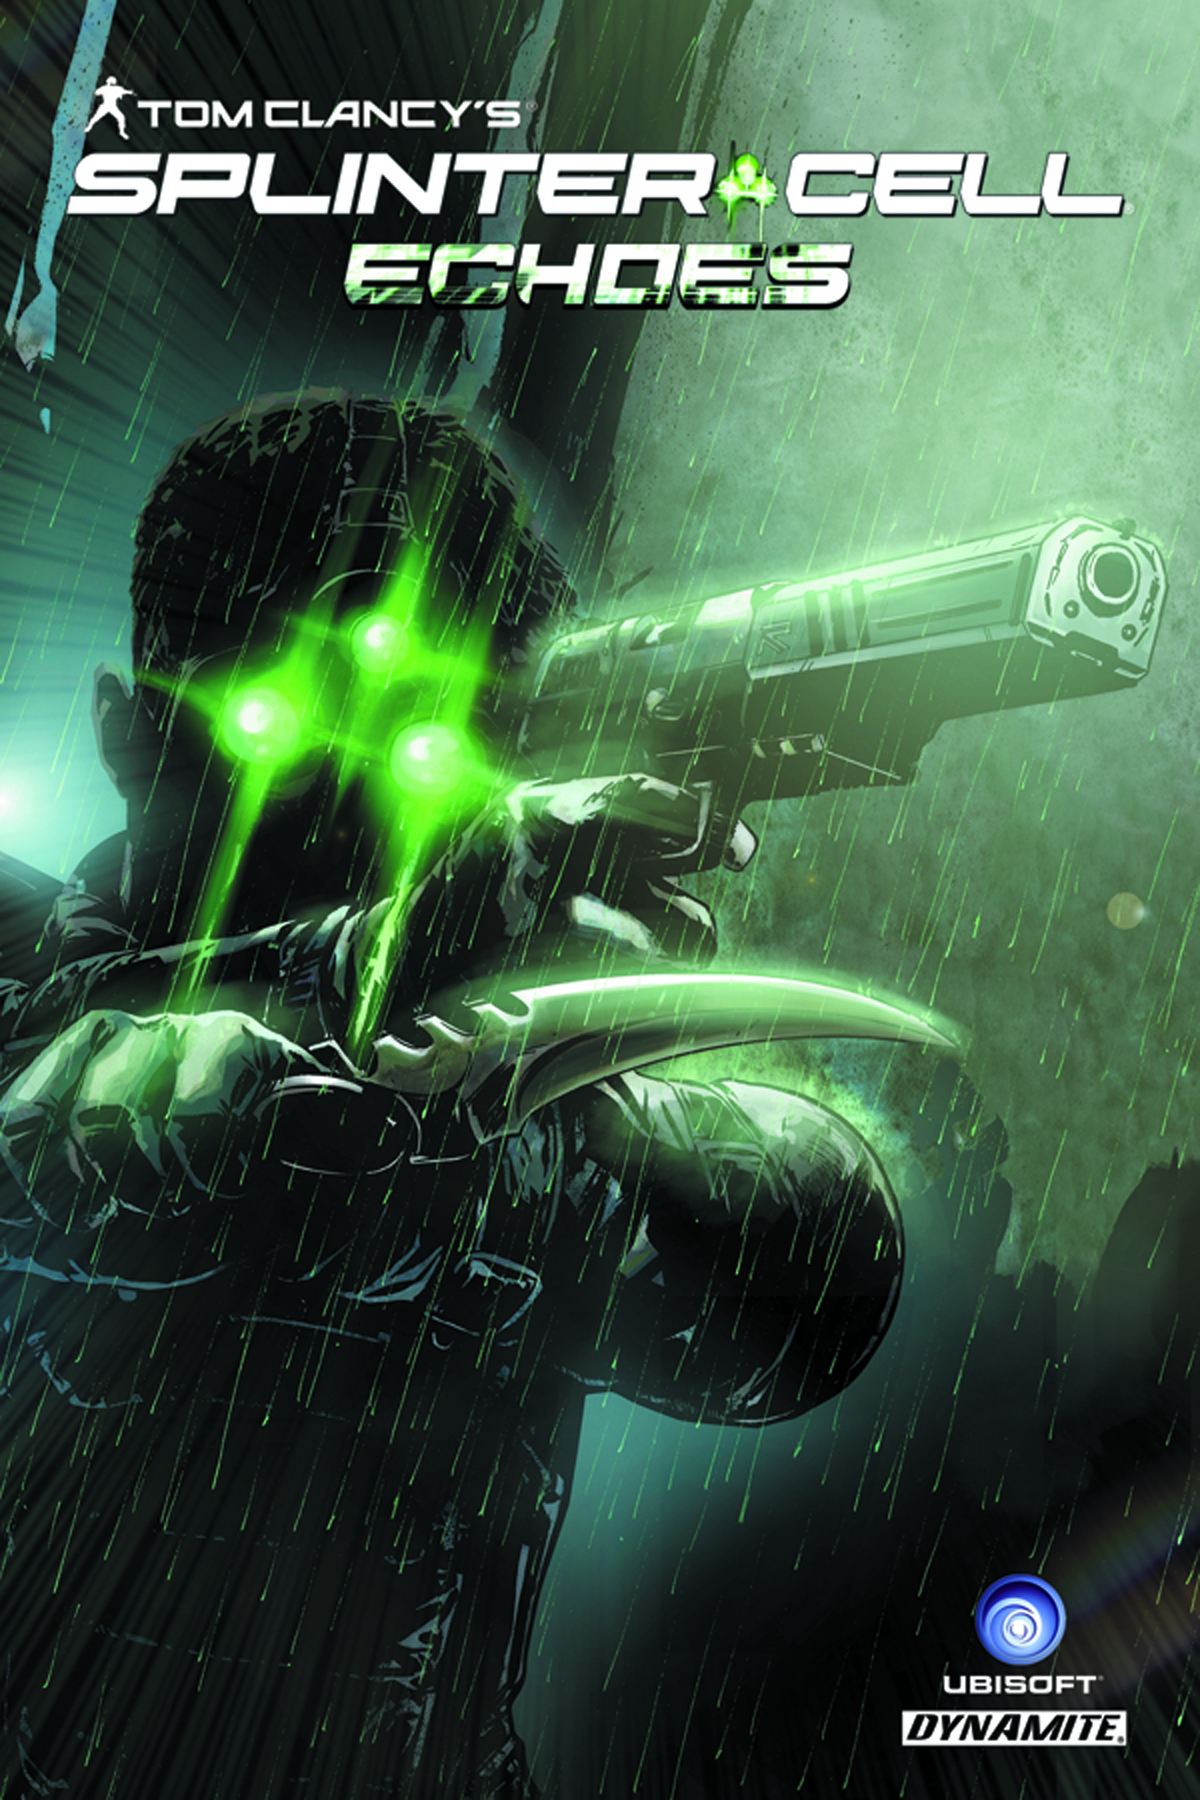 Tom Clancy Splinter Cell Echoes Graphic Novel